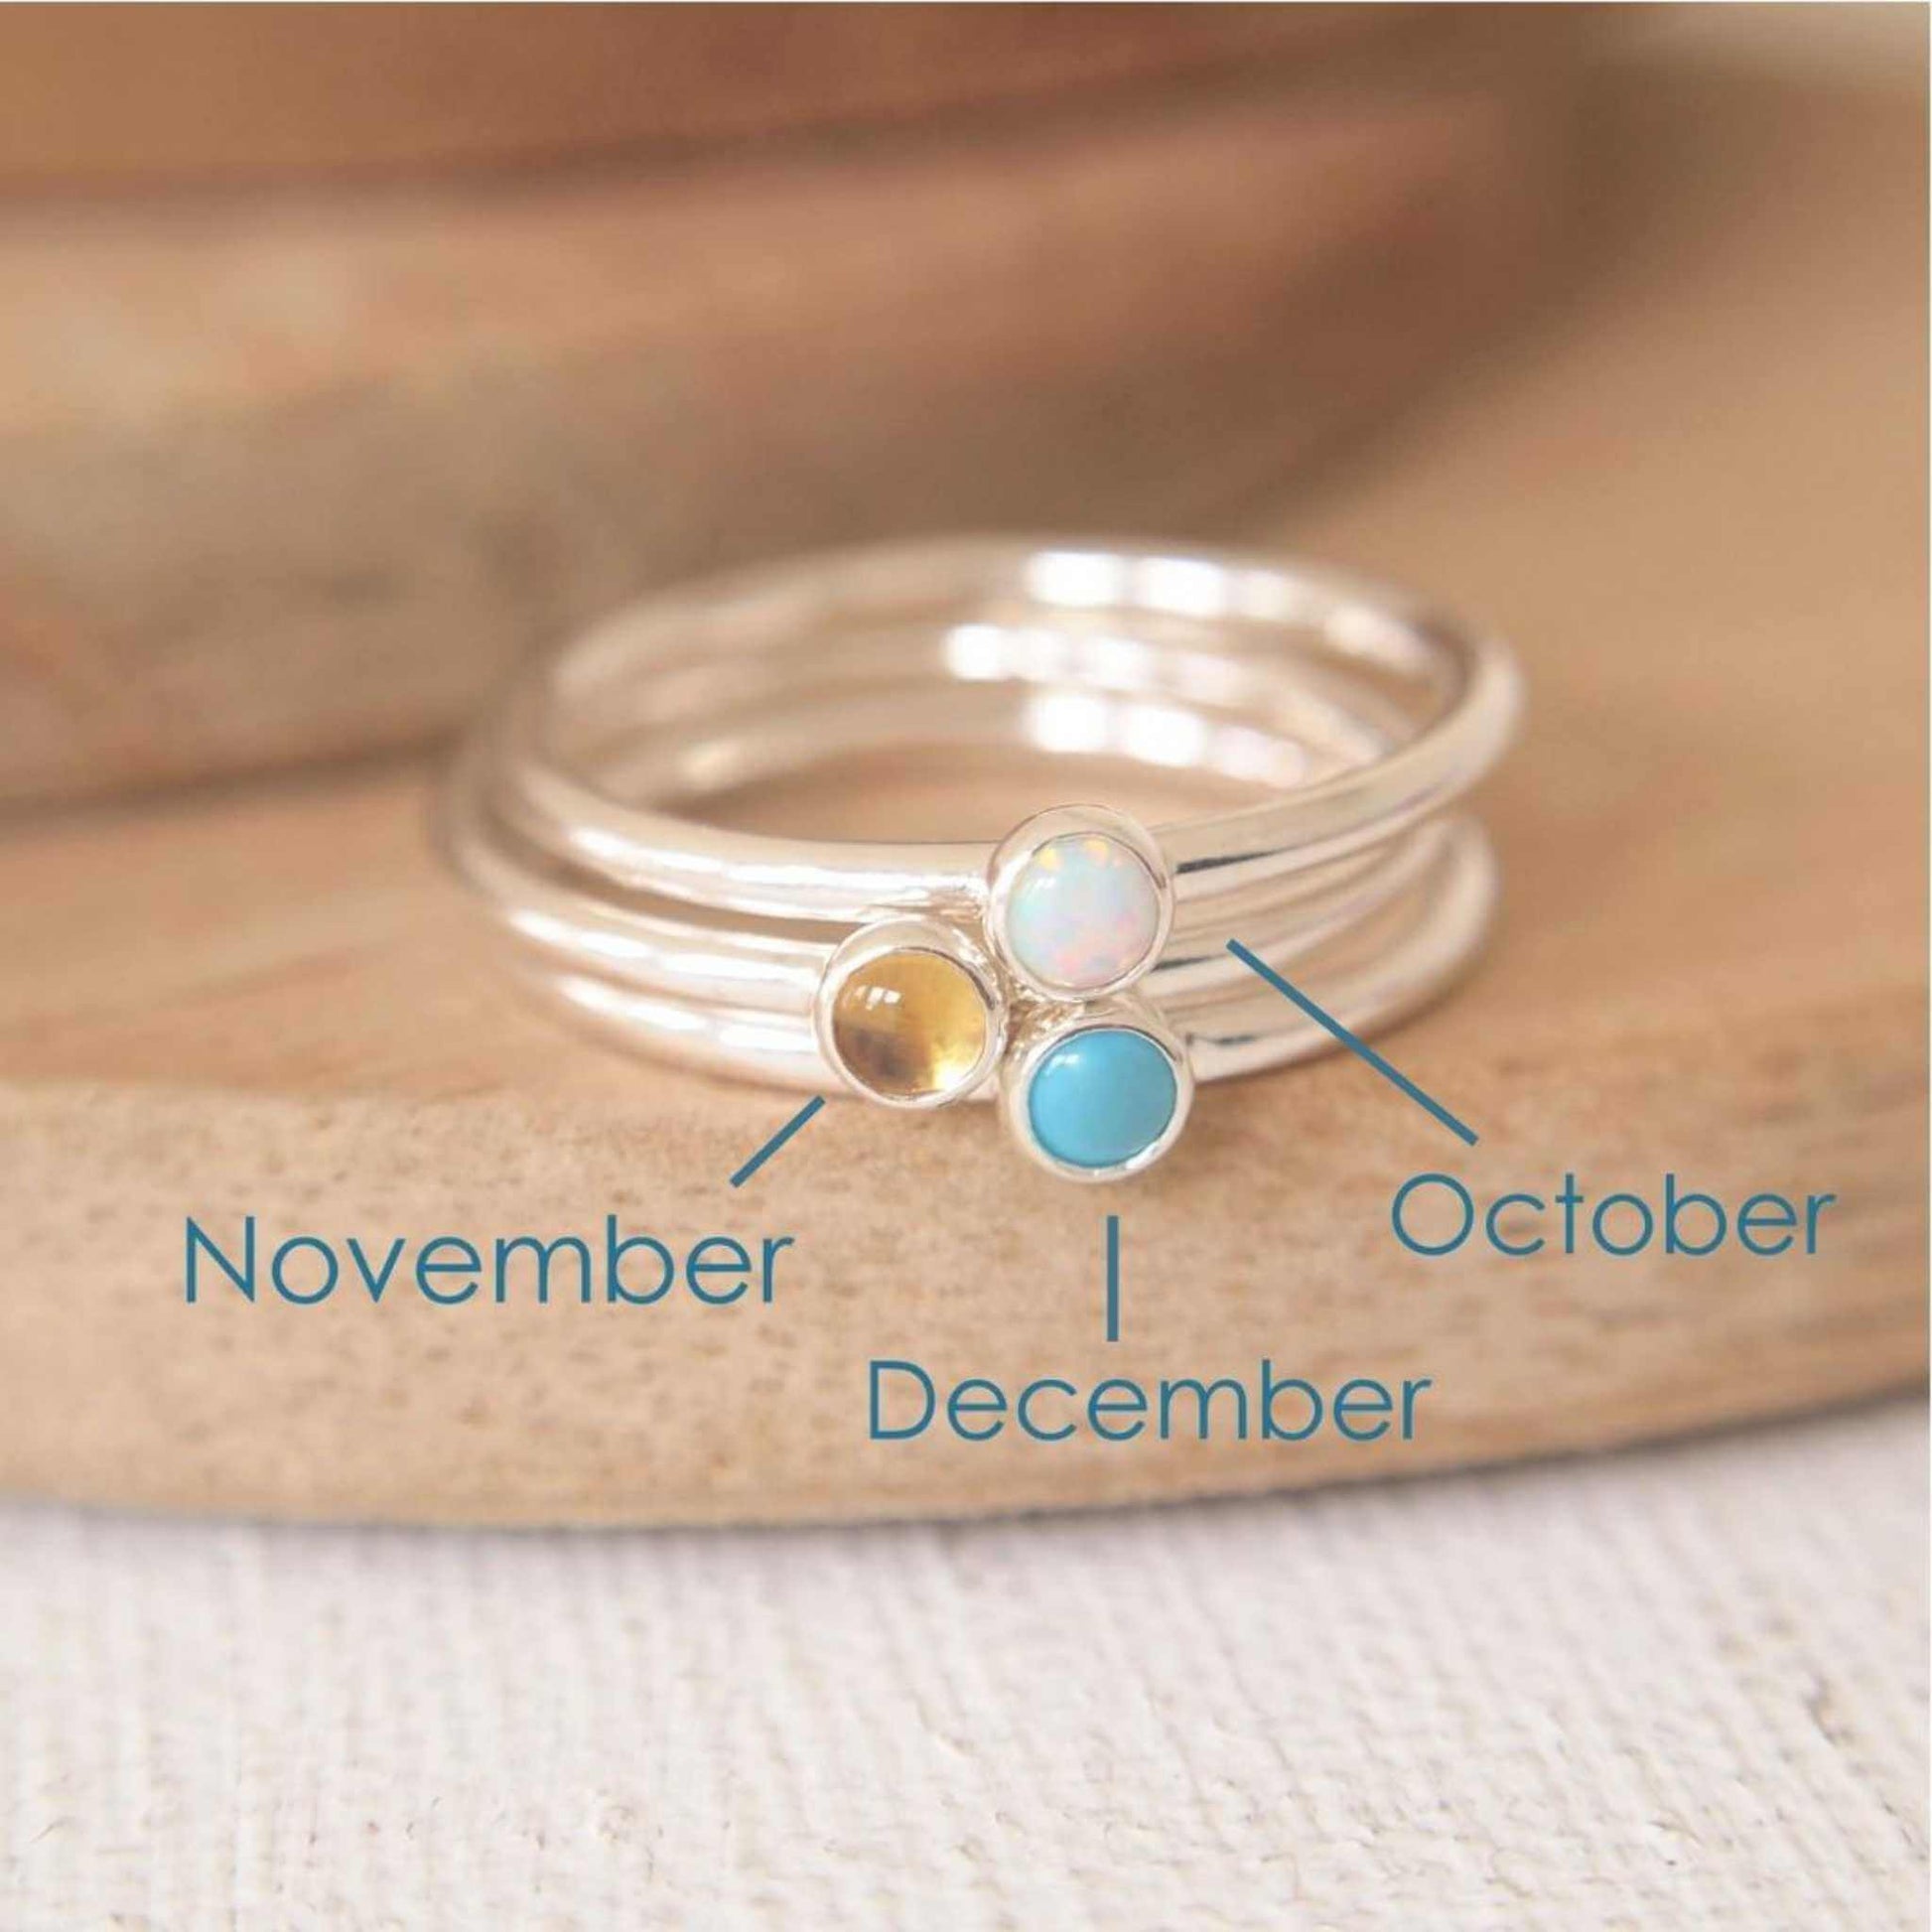 Three Silver rings, each set simply with a single gemstone in Lab Opal, Citrine and Turquoise in a round 3mm size. Birthstones for October, November and December. Handmade by Maram Jewellery in Edinburgh